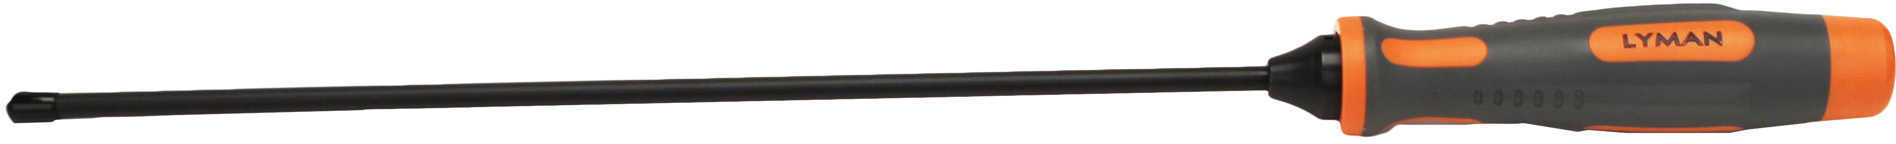 Pachmayr Cleaning Rod, .27-.45 Caliber, 12" 4020